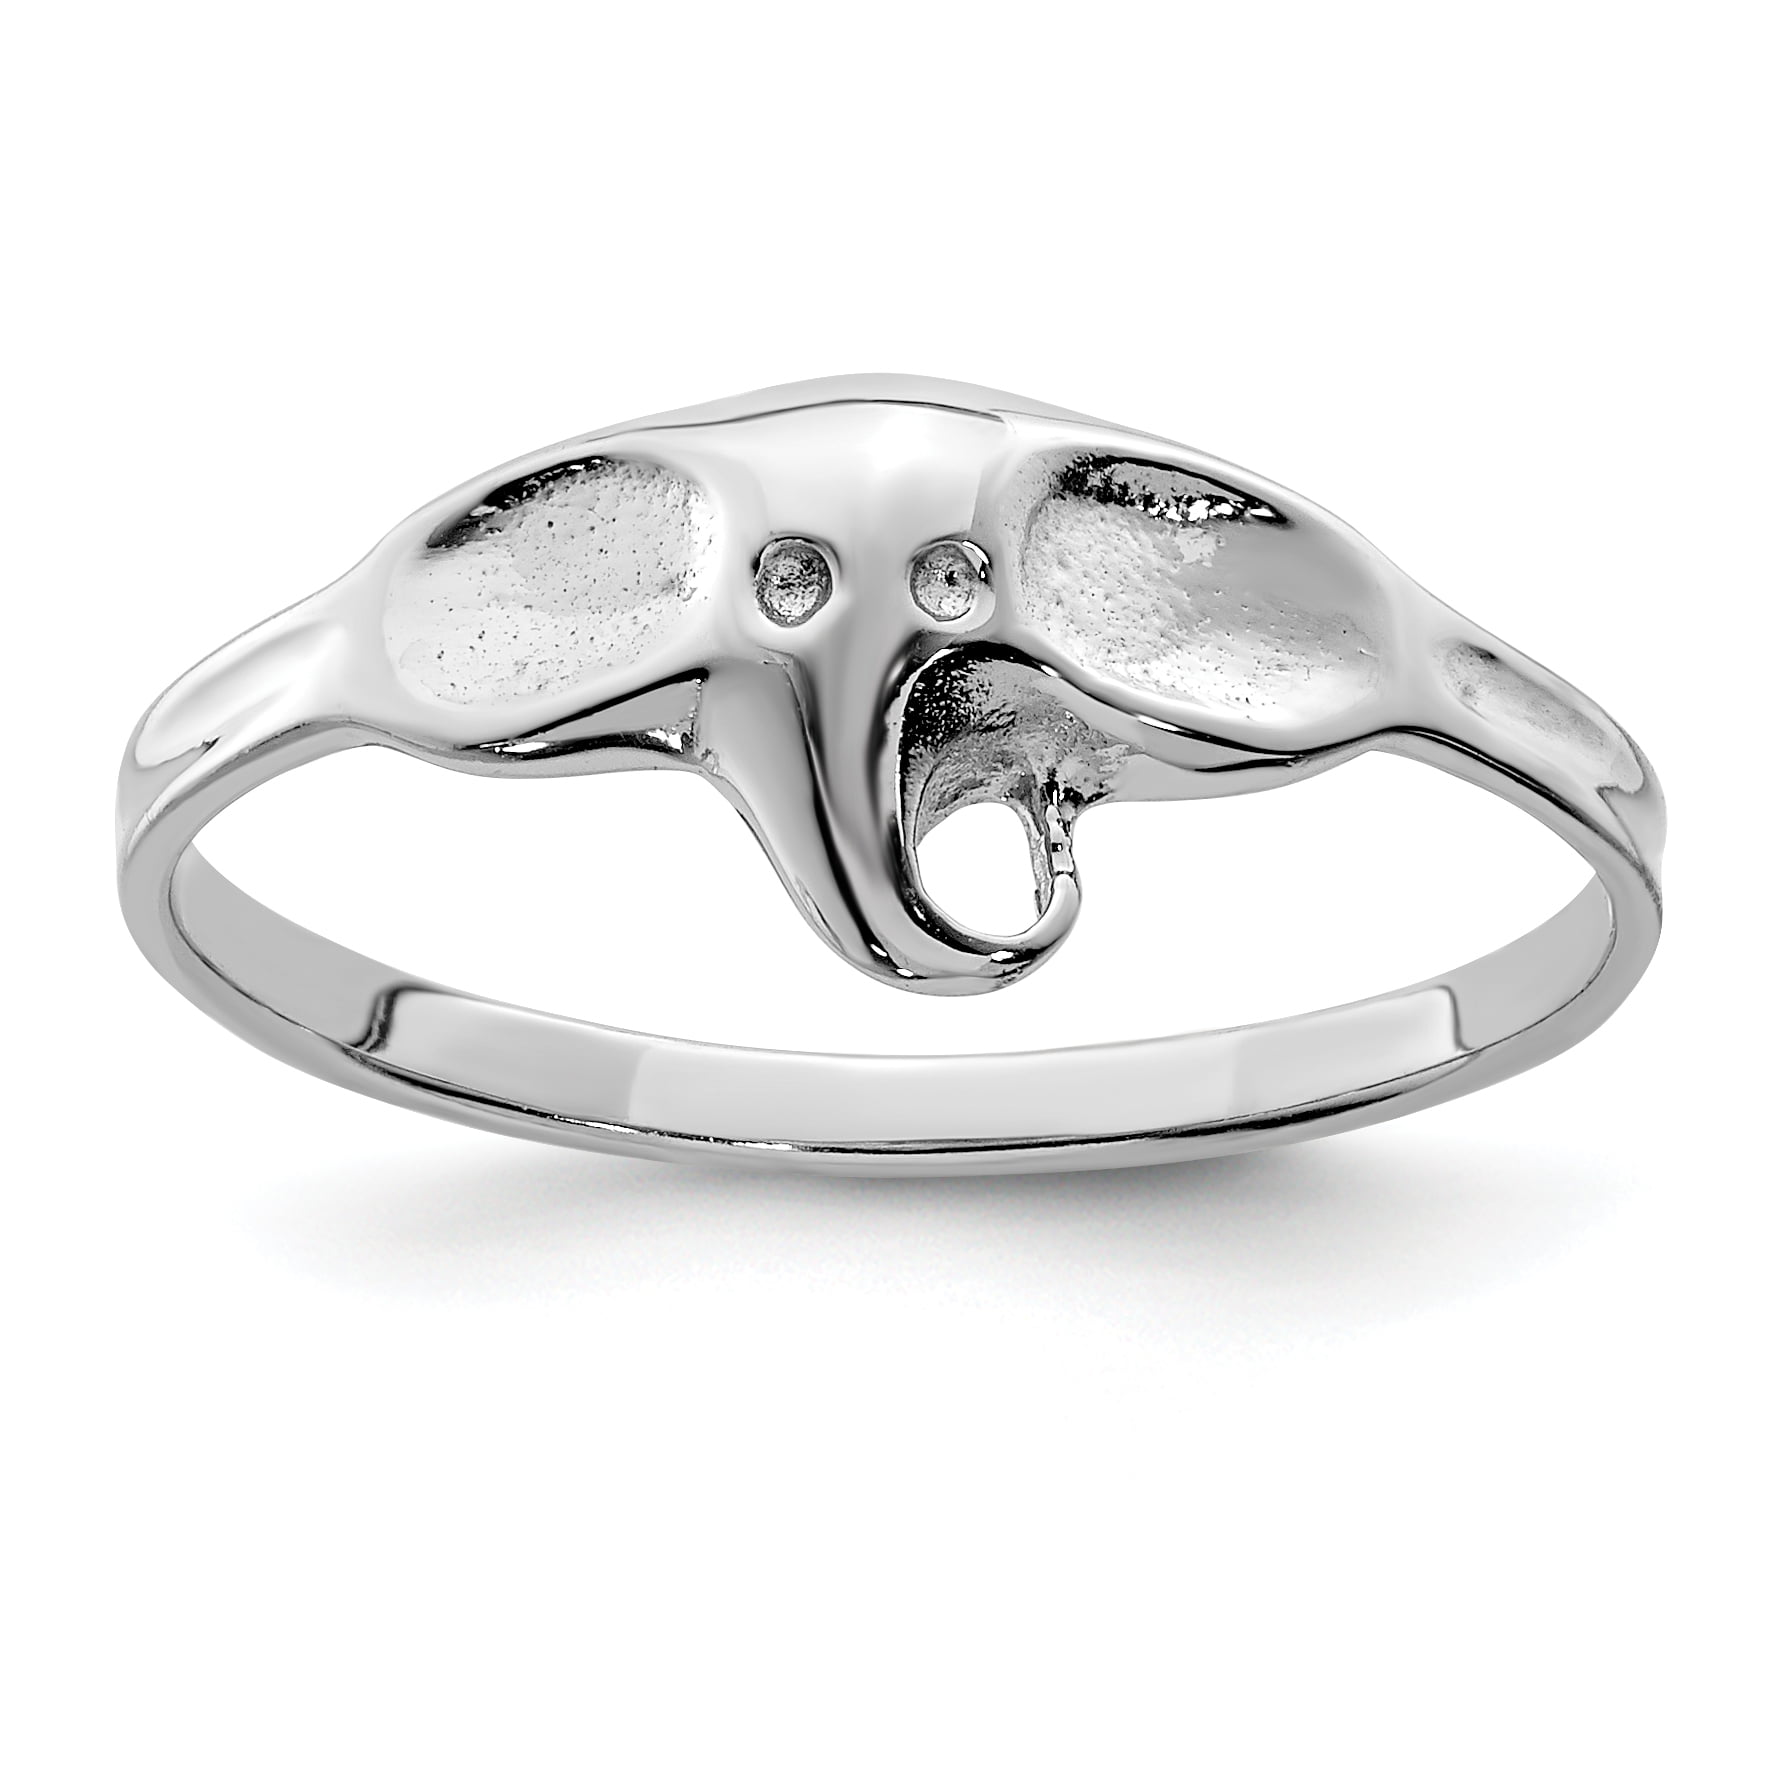 USA Seller Elephant Ring Sterling Silver 925 Best Price Jewelry Selectable 